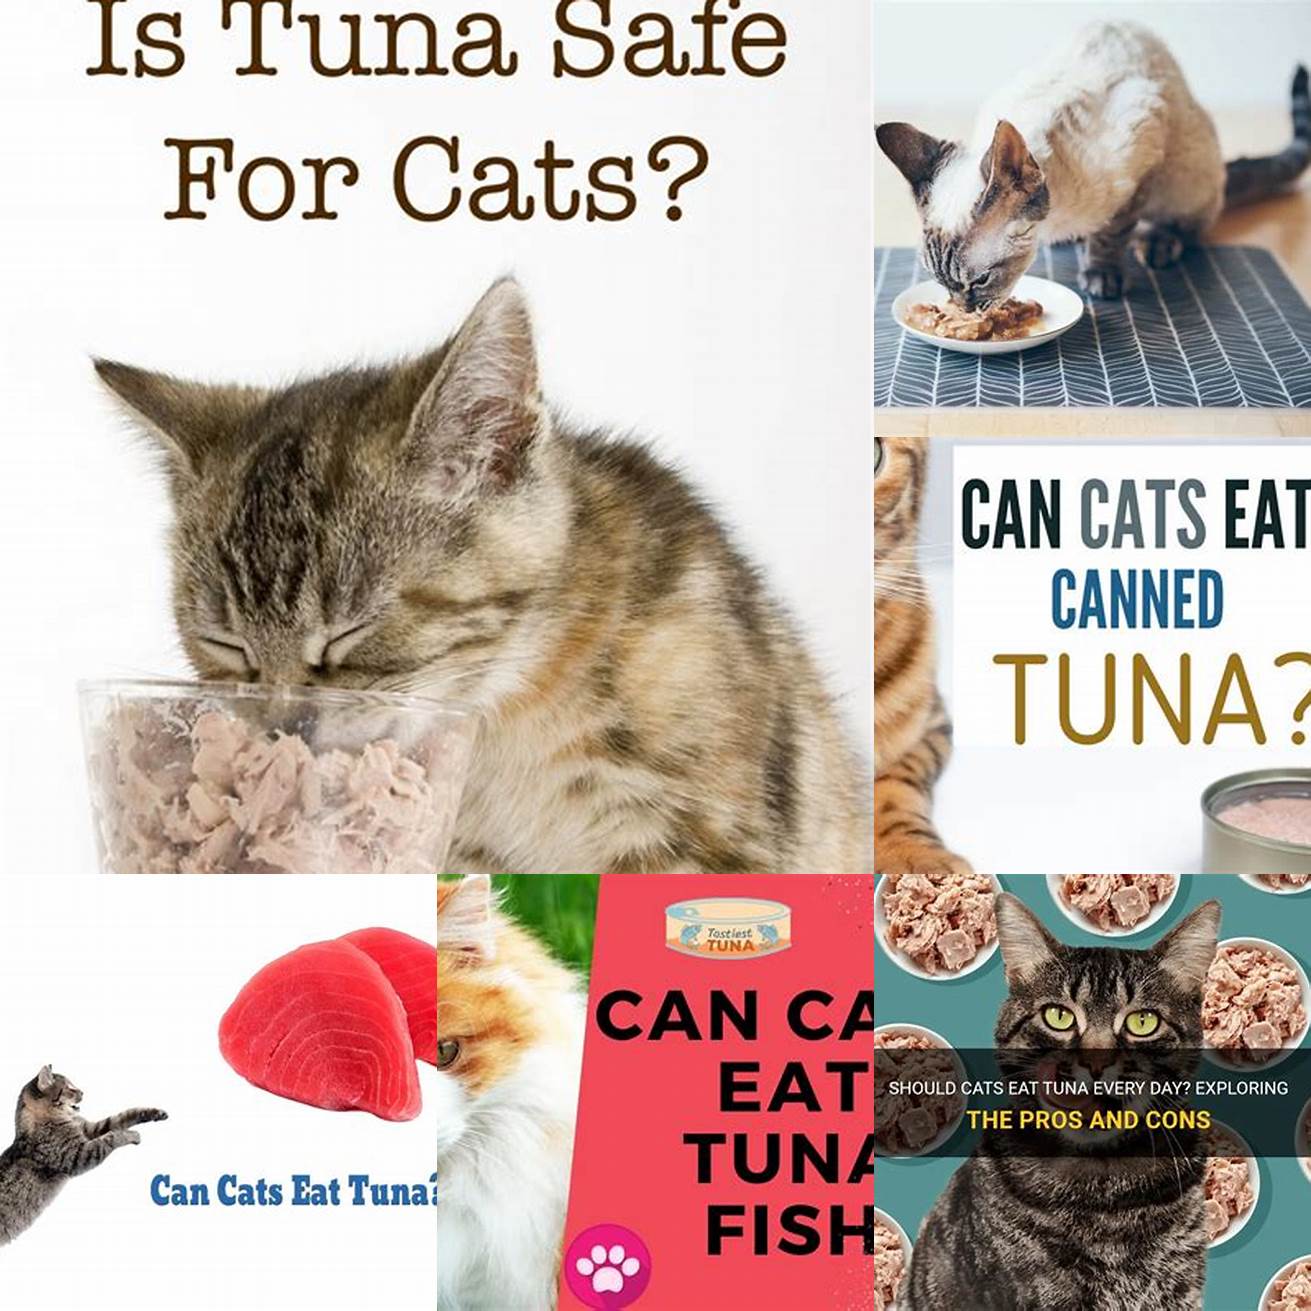 Q Can cats eat tuna every day